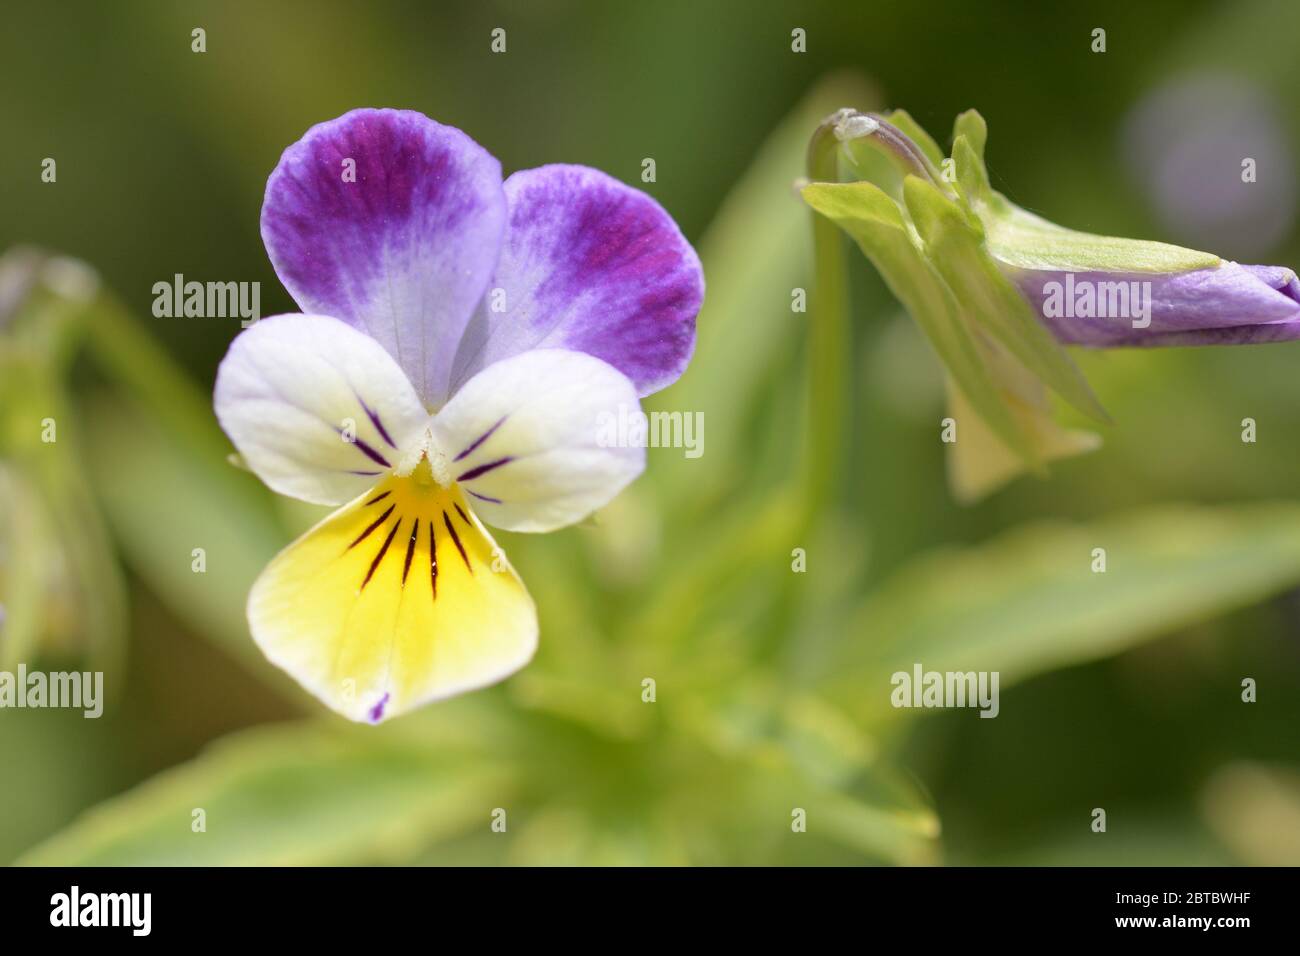 Macro view of colorful pansies Stock Photo